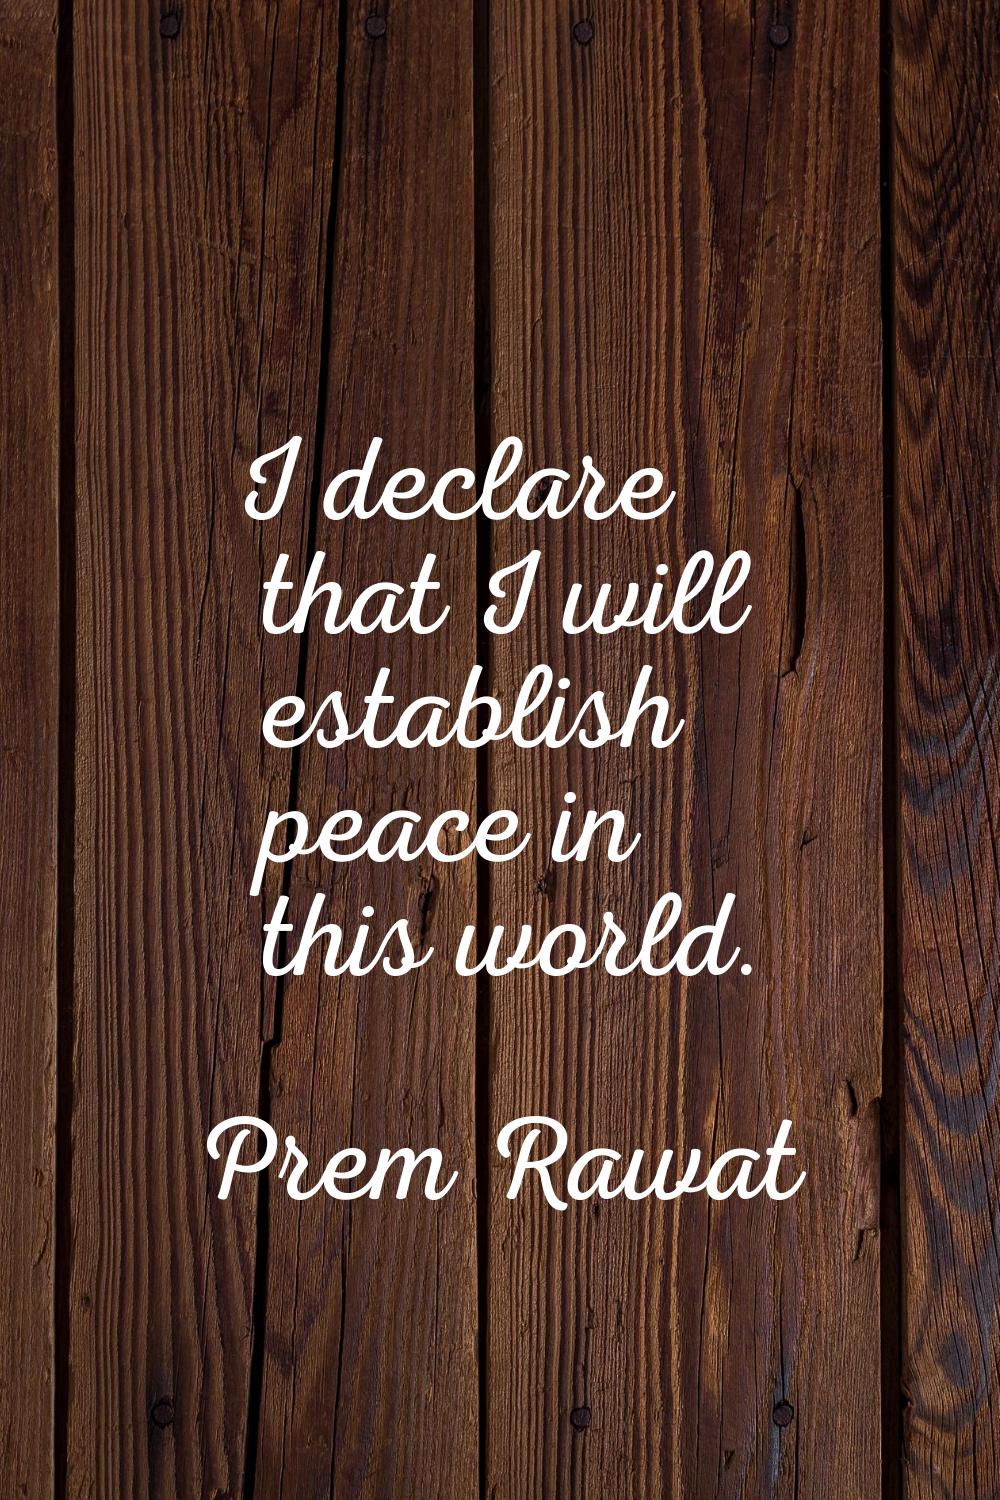 I declare that I will establish peace in this world.